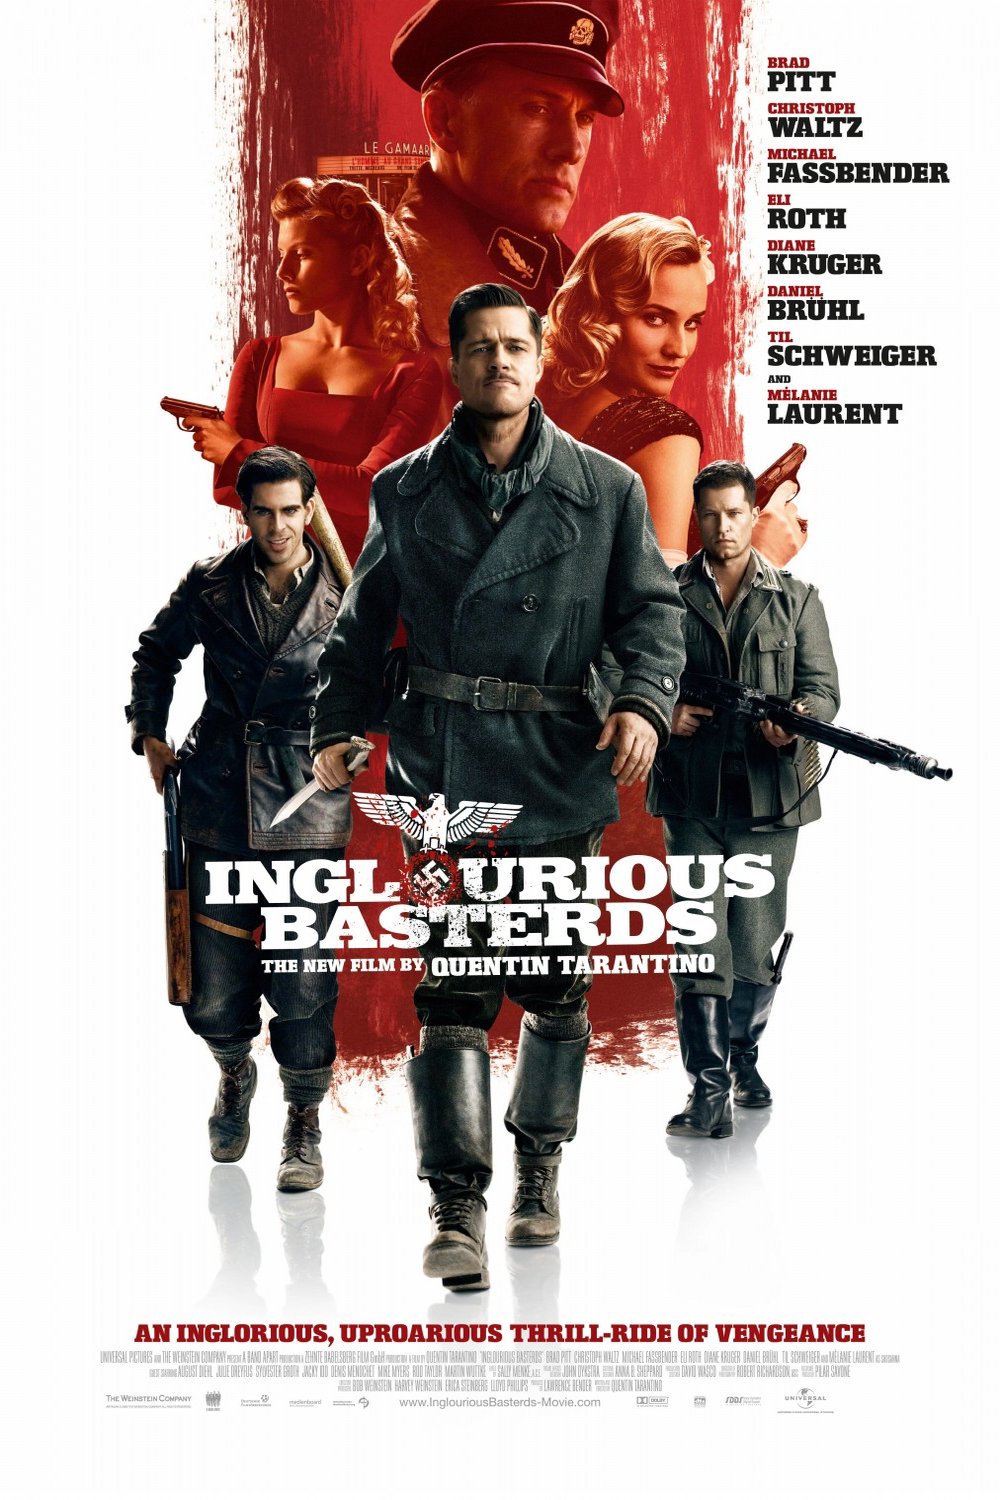 Poster of the movie Inglourious Basterds